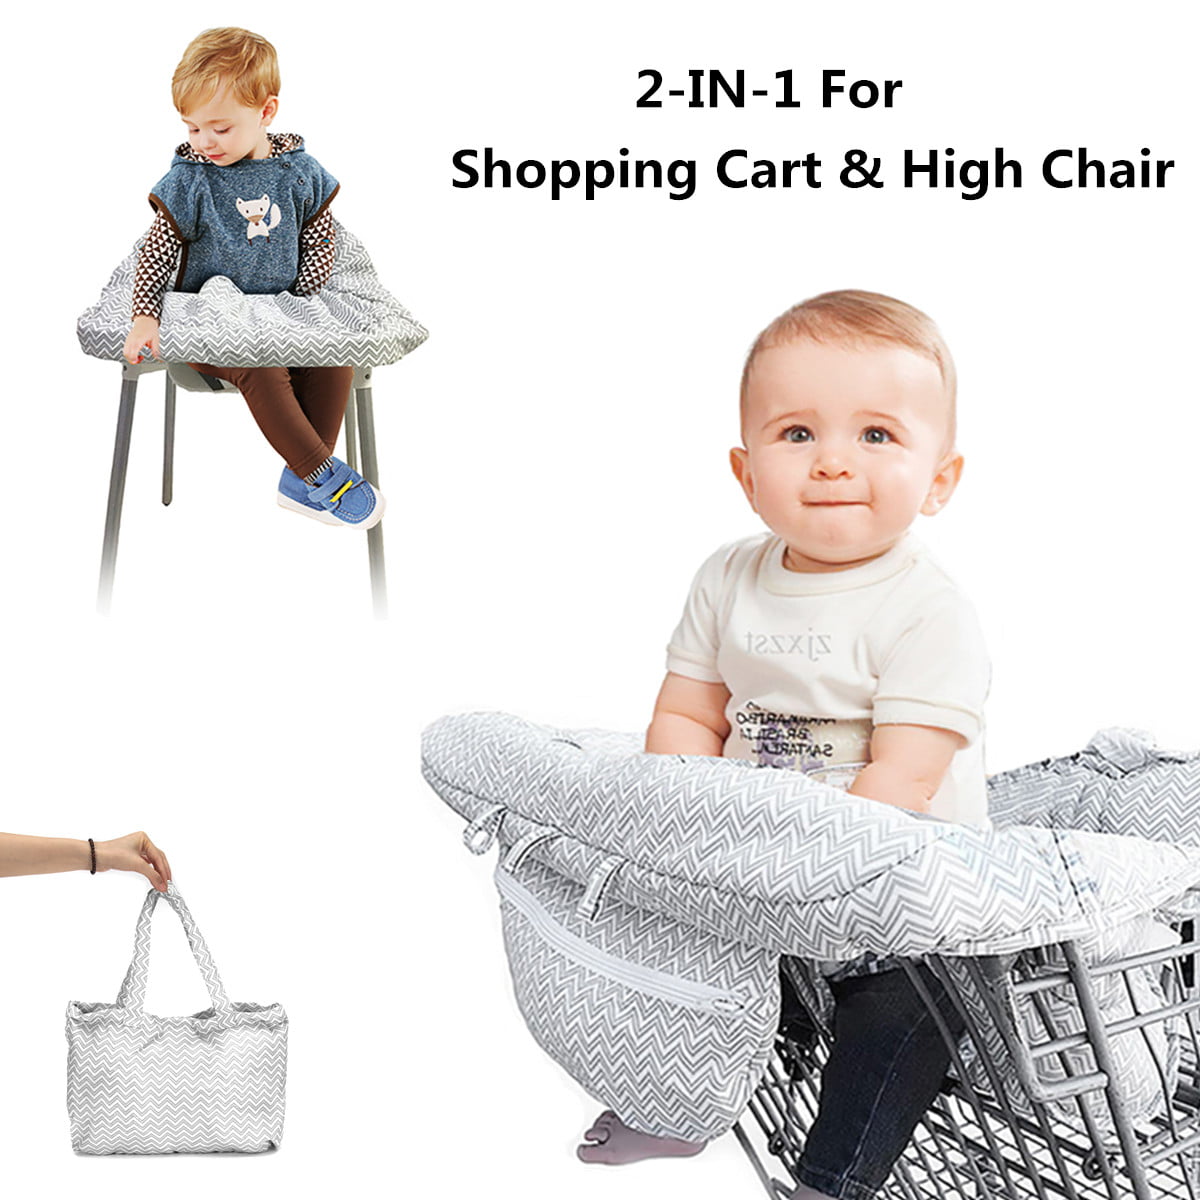 Portable Safety Baby Cart Shopping Hammock Toddler Infant Seat Carrier Portable 